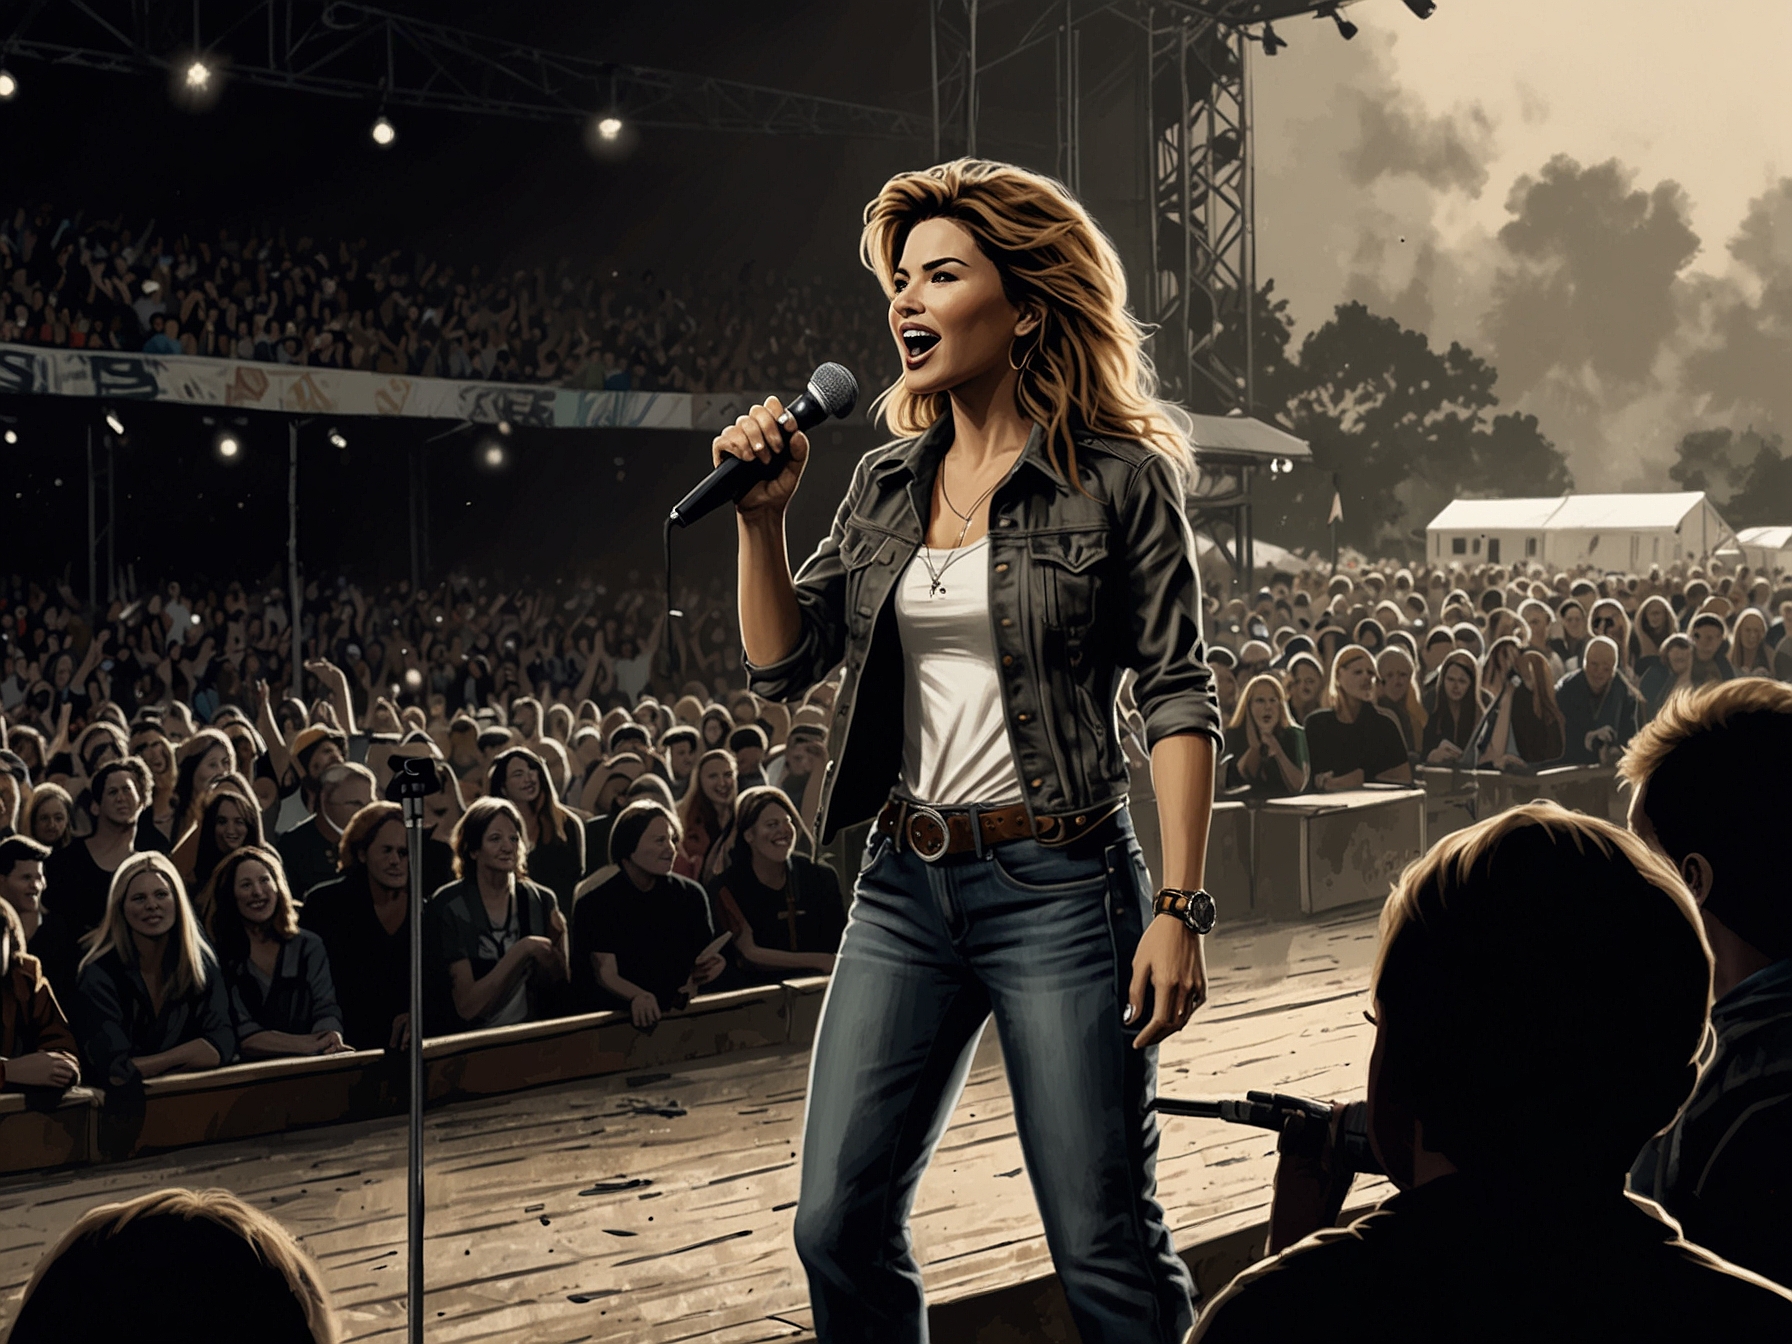 Shania Twain stands on stage at Glastonbury, holding a microphone, with a large crowd in the background. Her expression shows determination as she deals with technical difficulties.